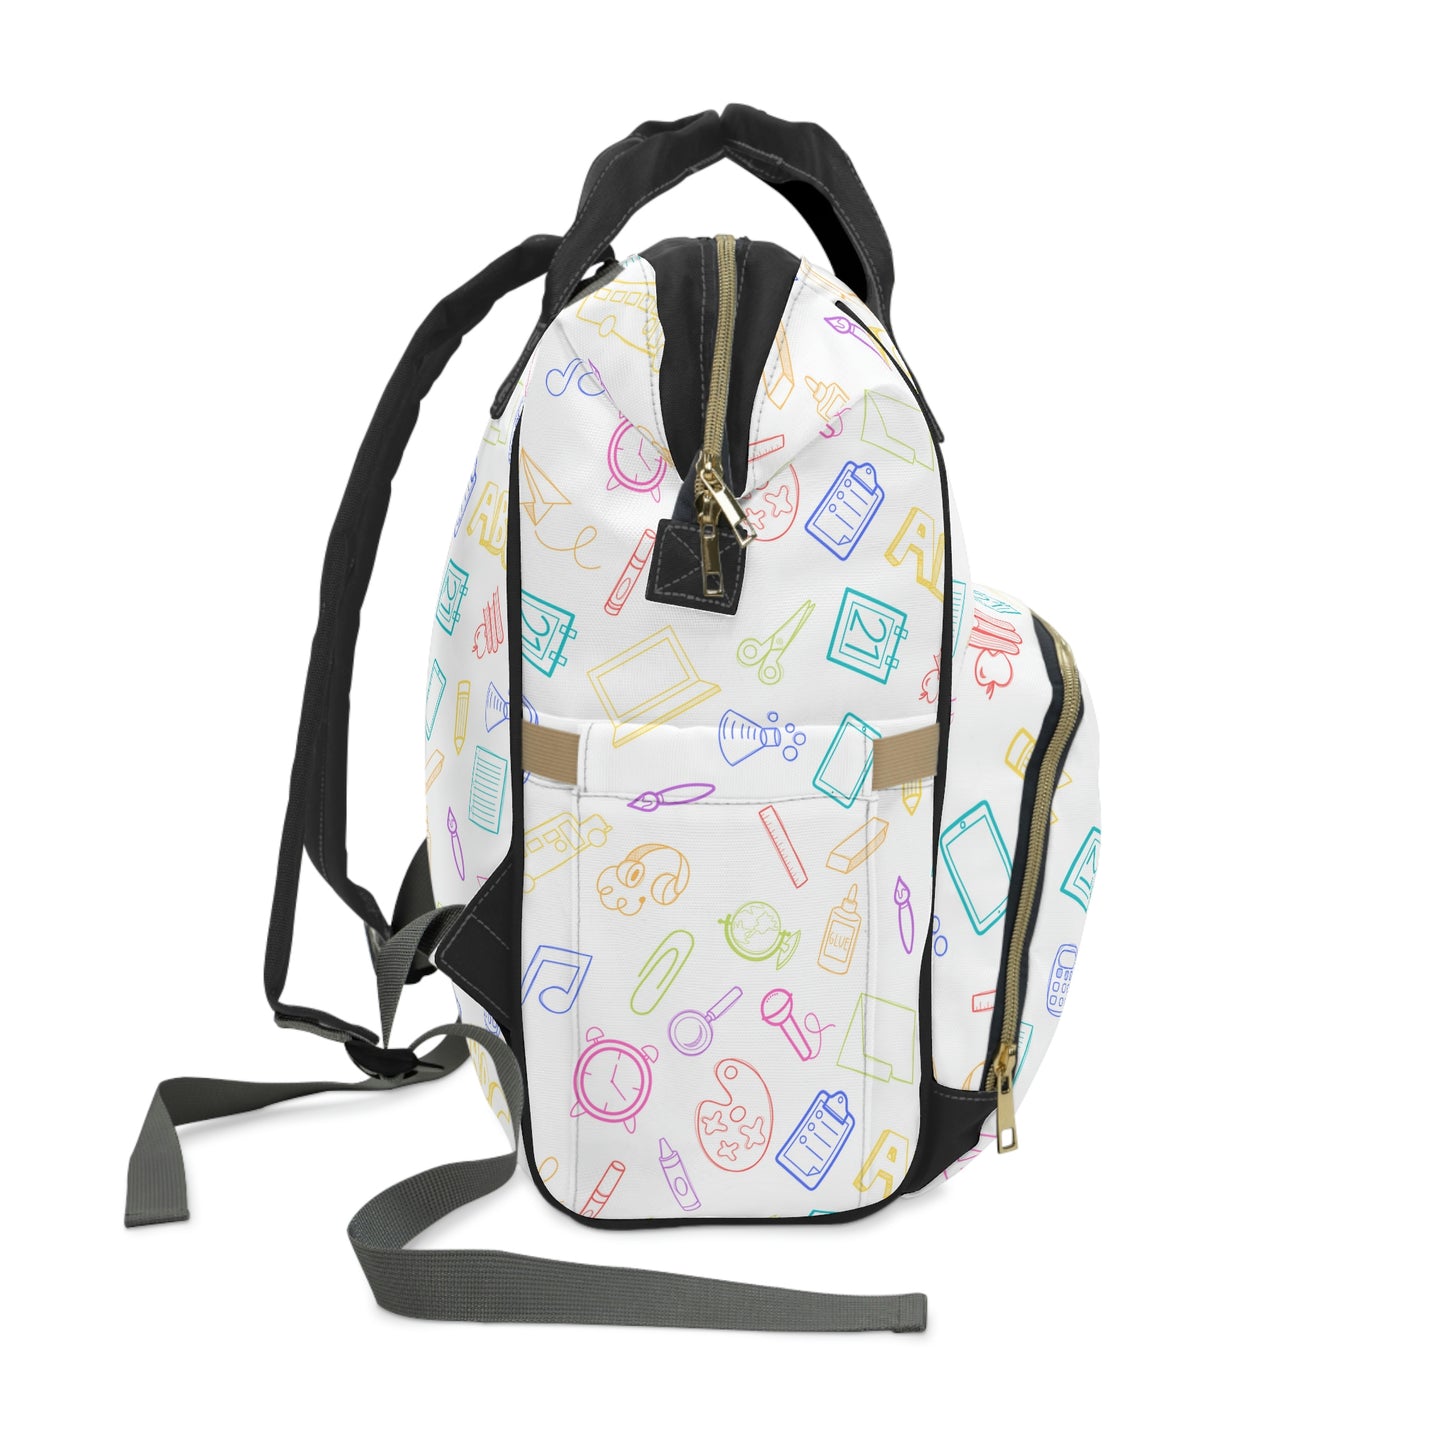 Bright Rainbow on White Elementary Doodles Backpack